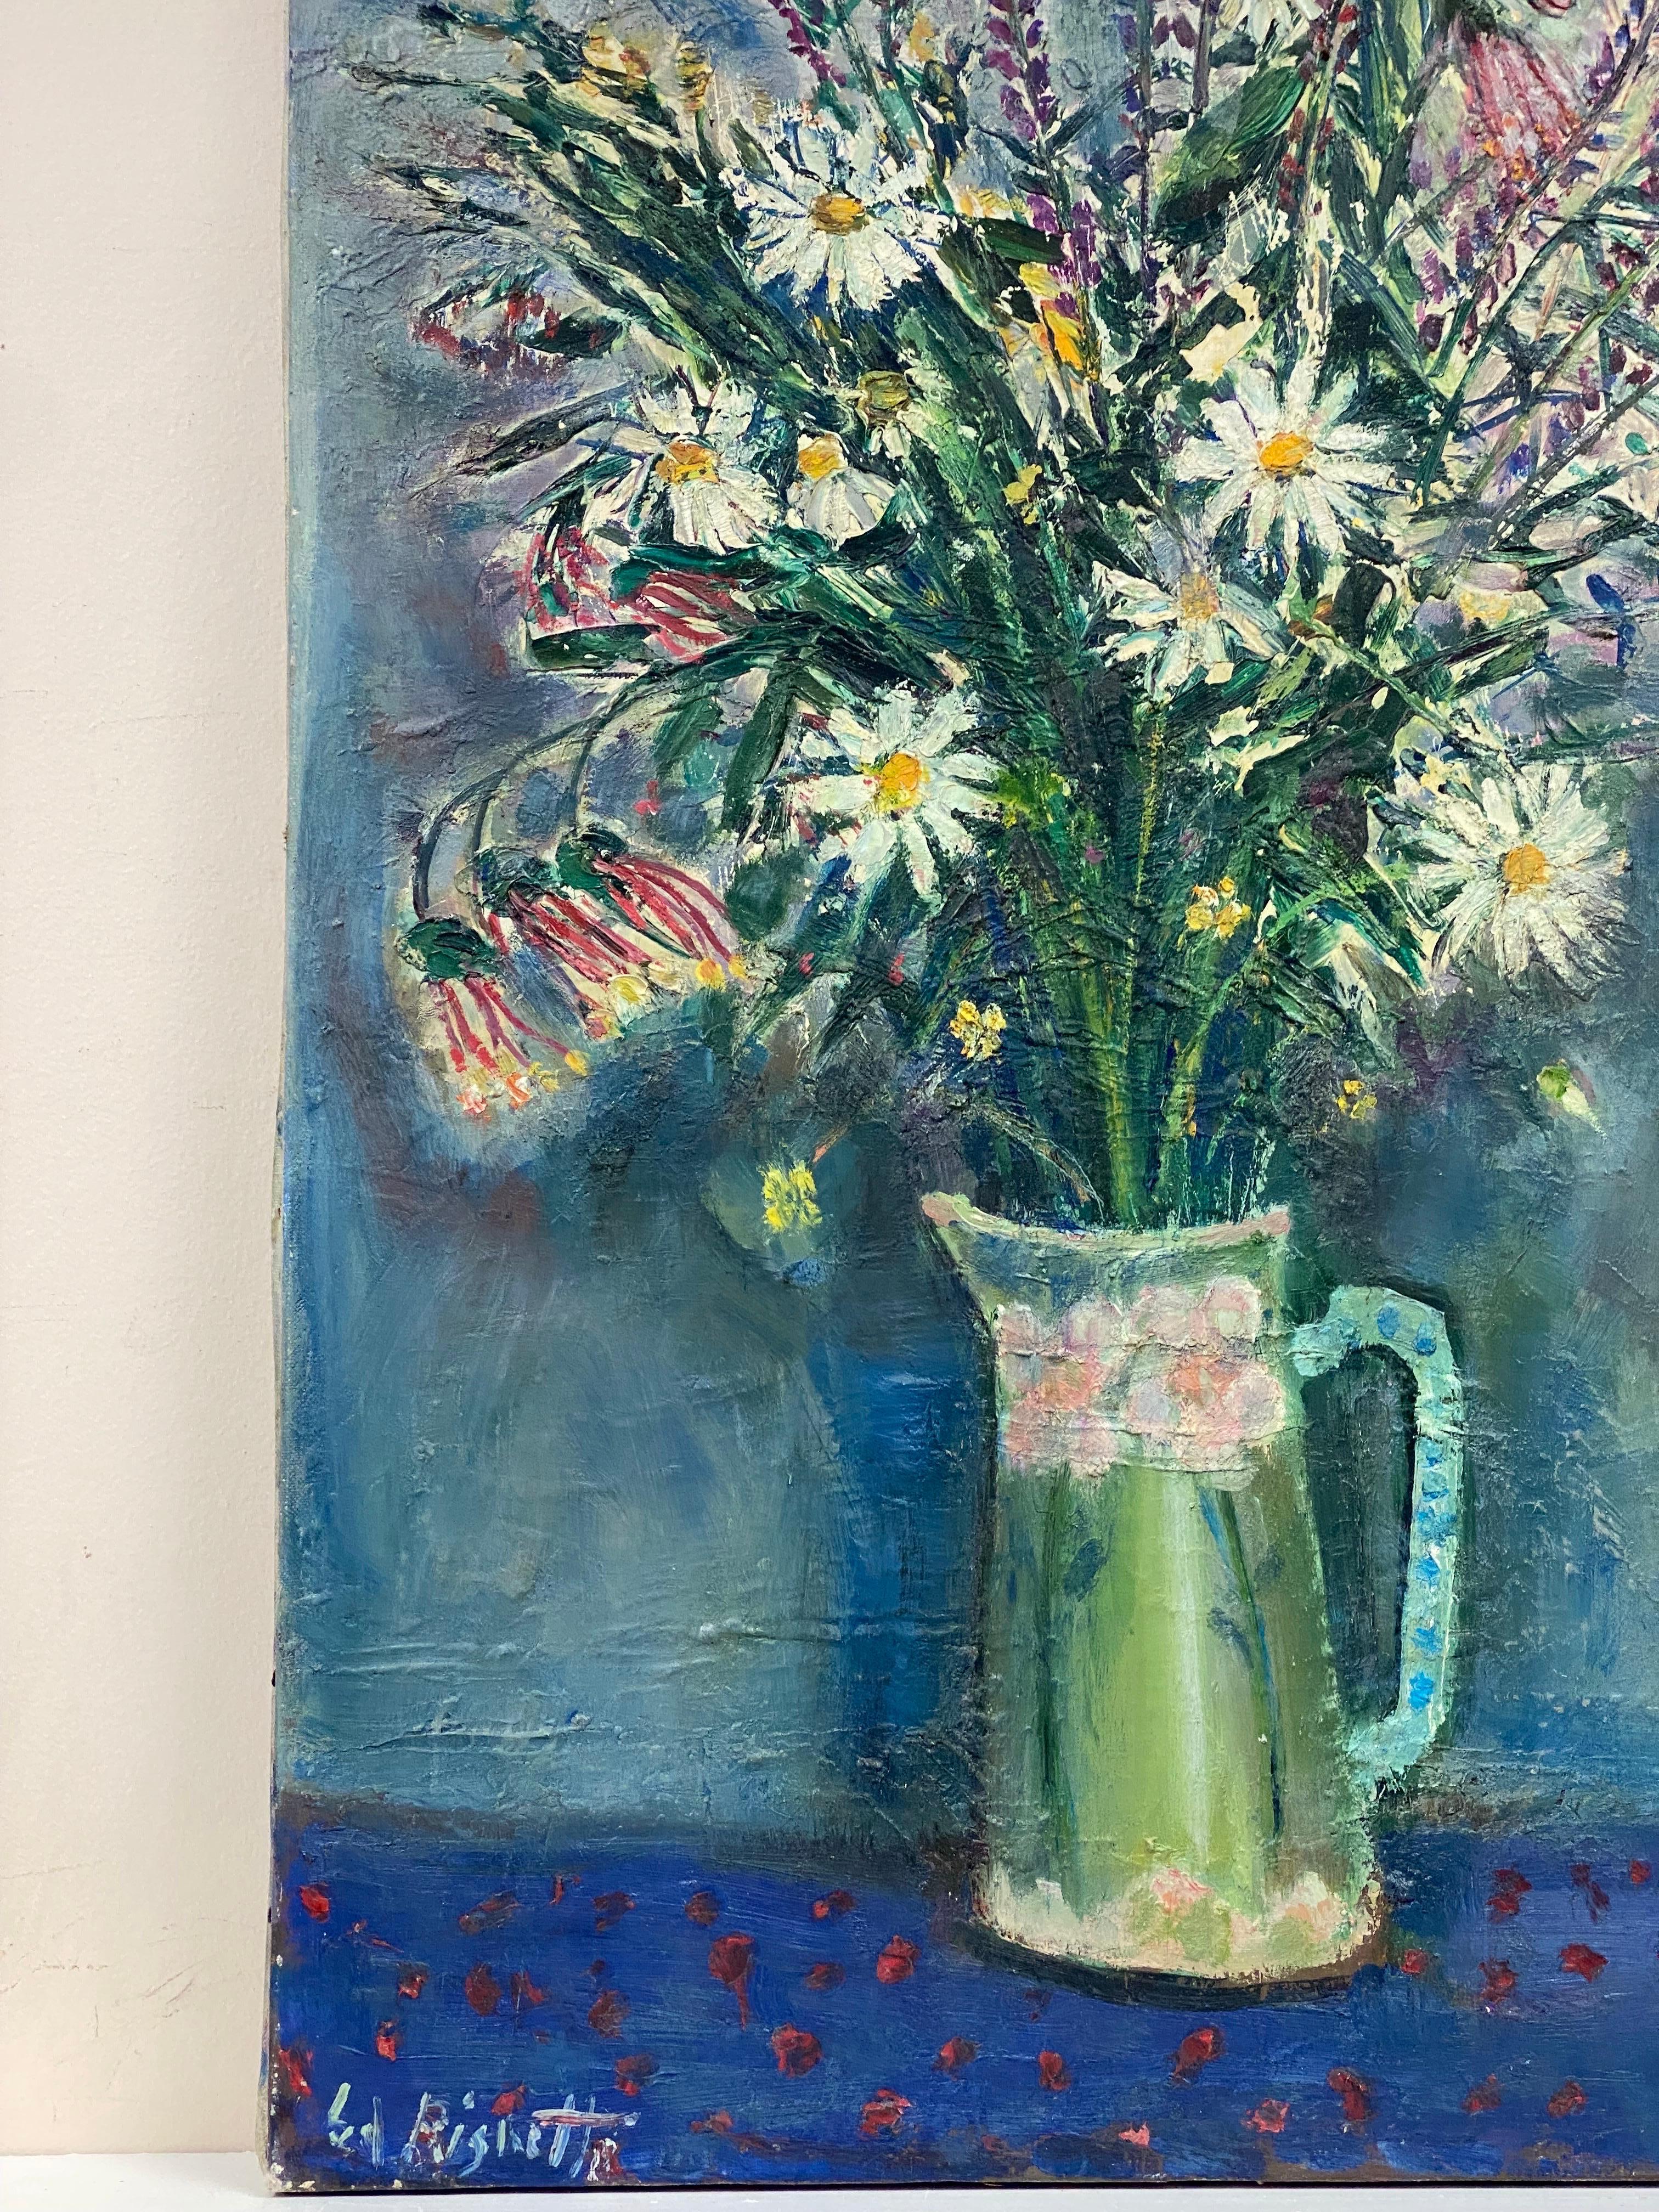 Large 1950's French Post-Impressionist Signed Oil - Bright Flowers Green & Blue - Gray Still-Life Painting by Édouard Righetti (1924-2001)